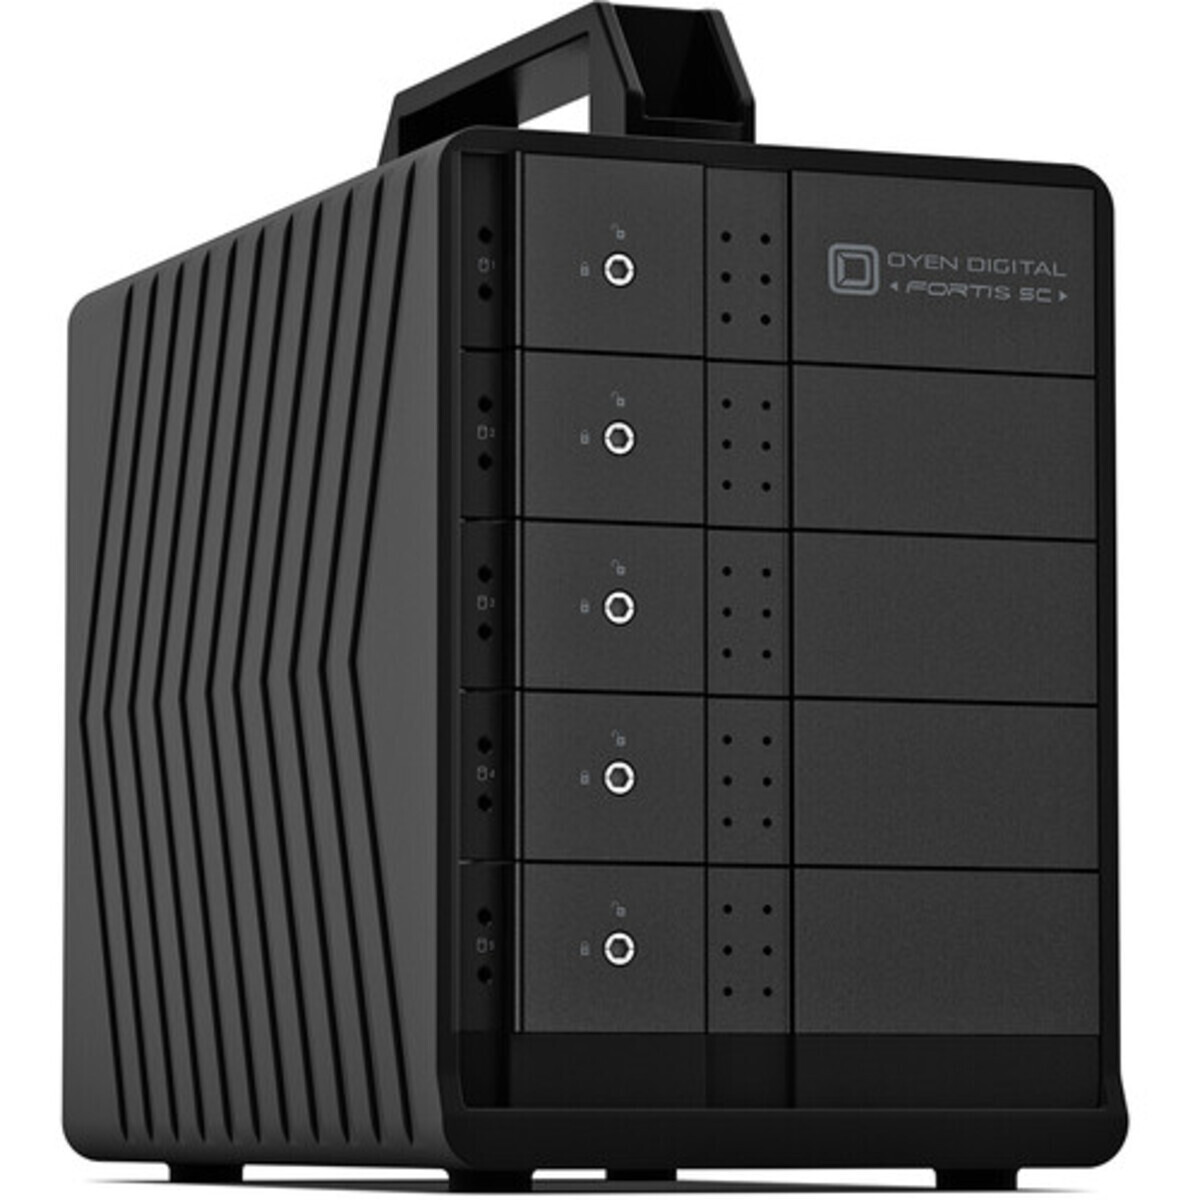 OYEN Fortis 5C 100tb 5-Bay Desktop Multimedia / Power User / Business DAS - Direct Attached Storage Device 5x20tb Toshiba Enterprise Capacity MG10ACA20TE 3.5 7200rpm SATA 6Gb/s HDD ENTERPRISE Class Drives Installed - Burn-In Tested Fortis 5C